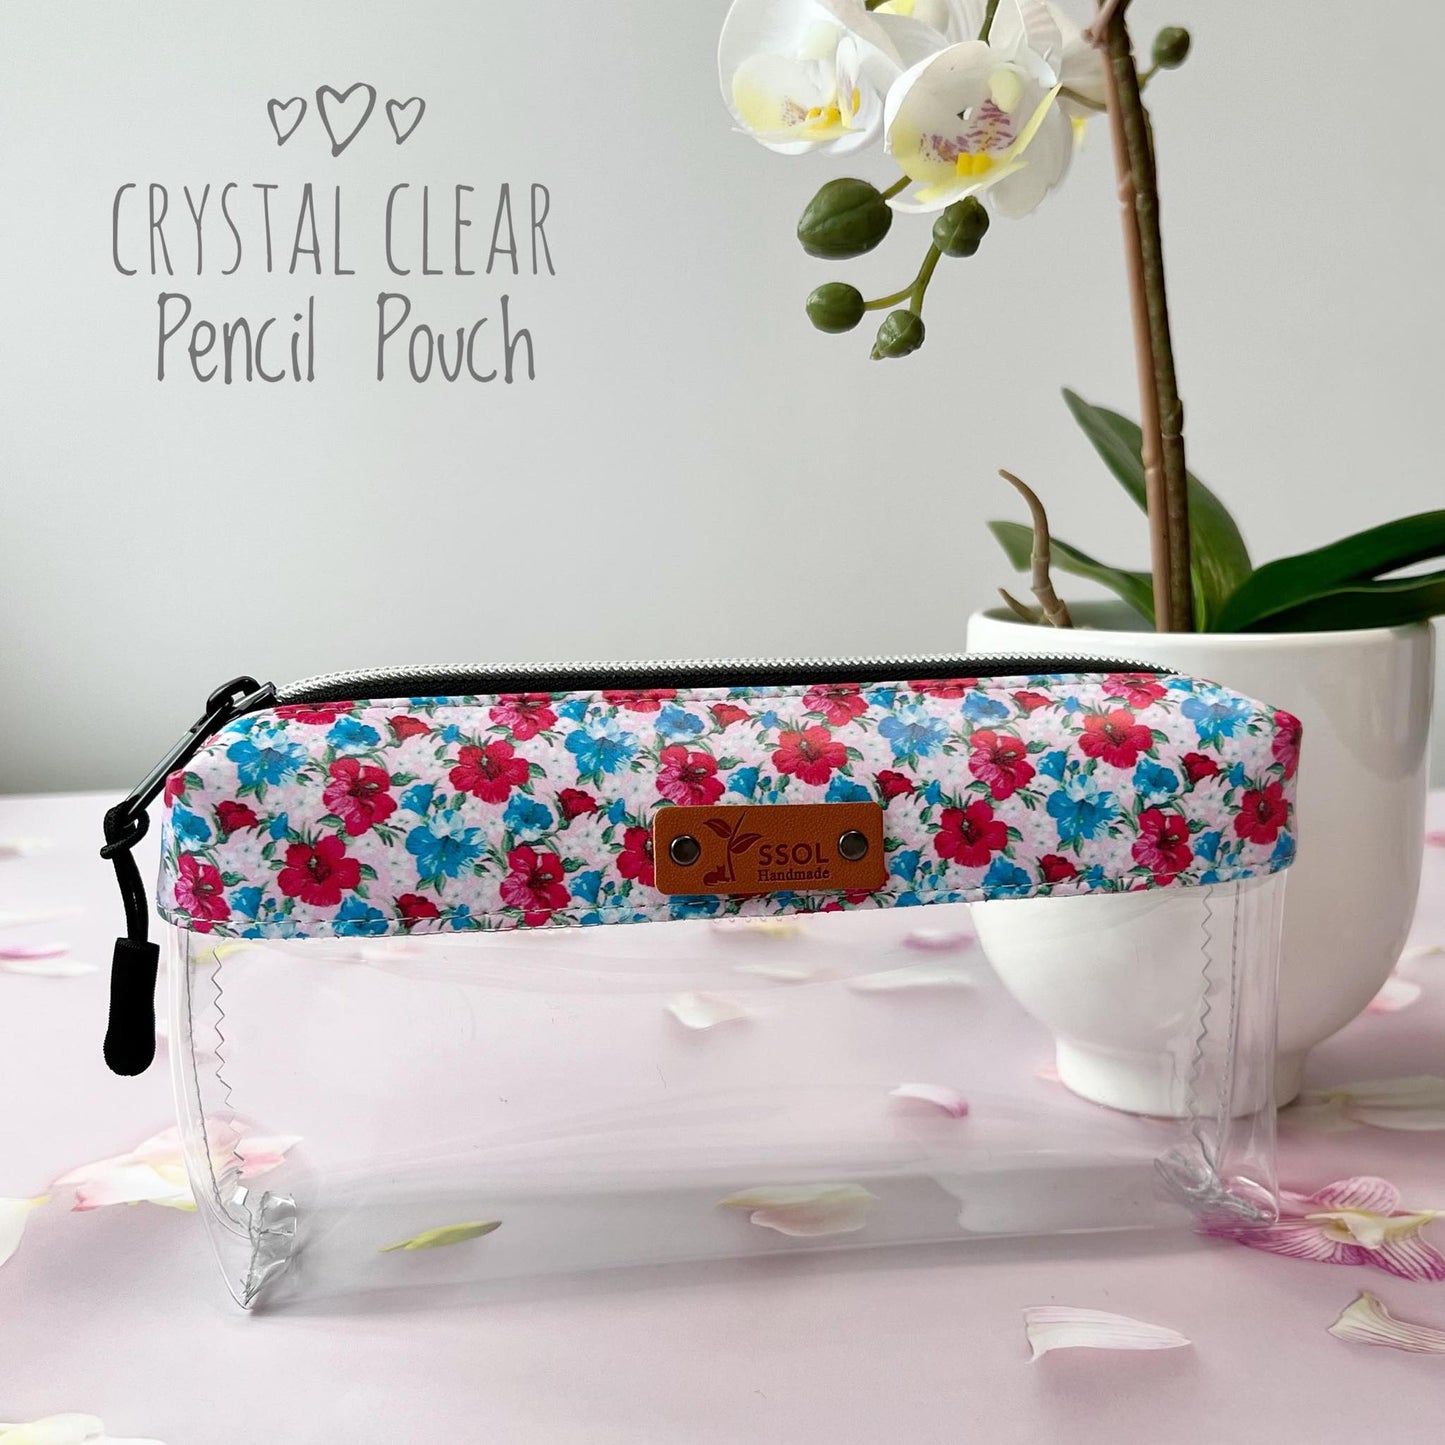 Crystal Clear Pencil Pouch - CCPP05